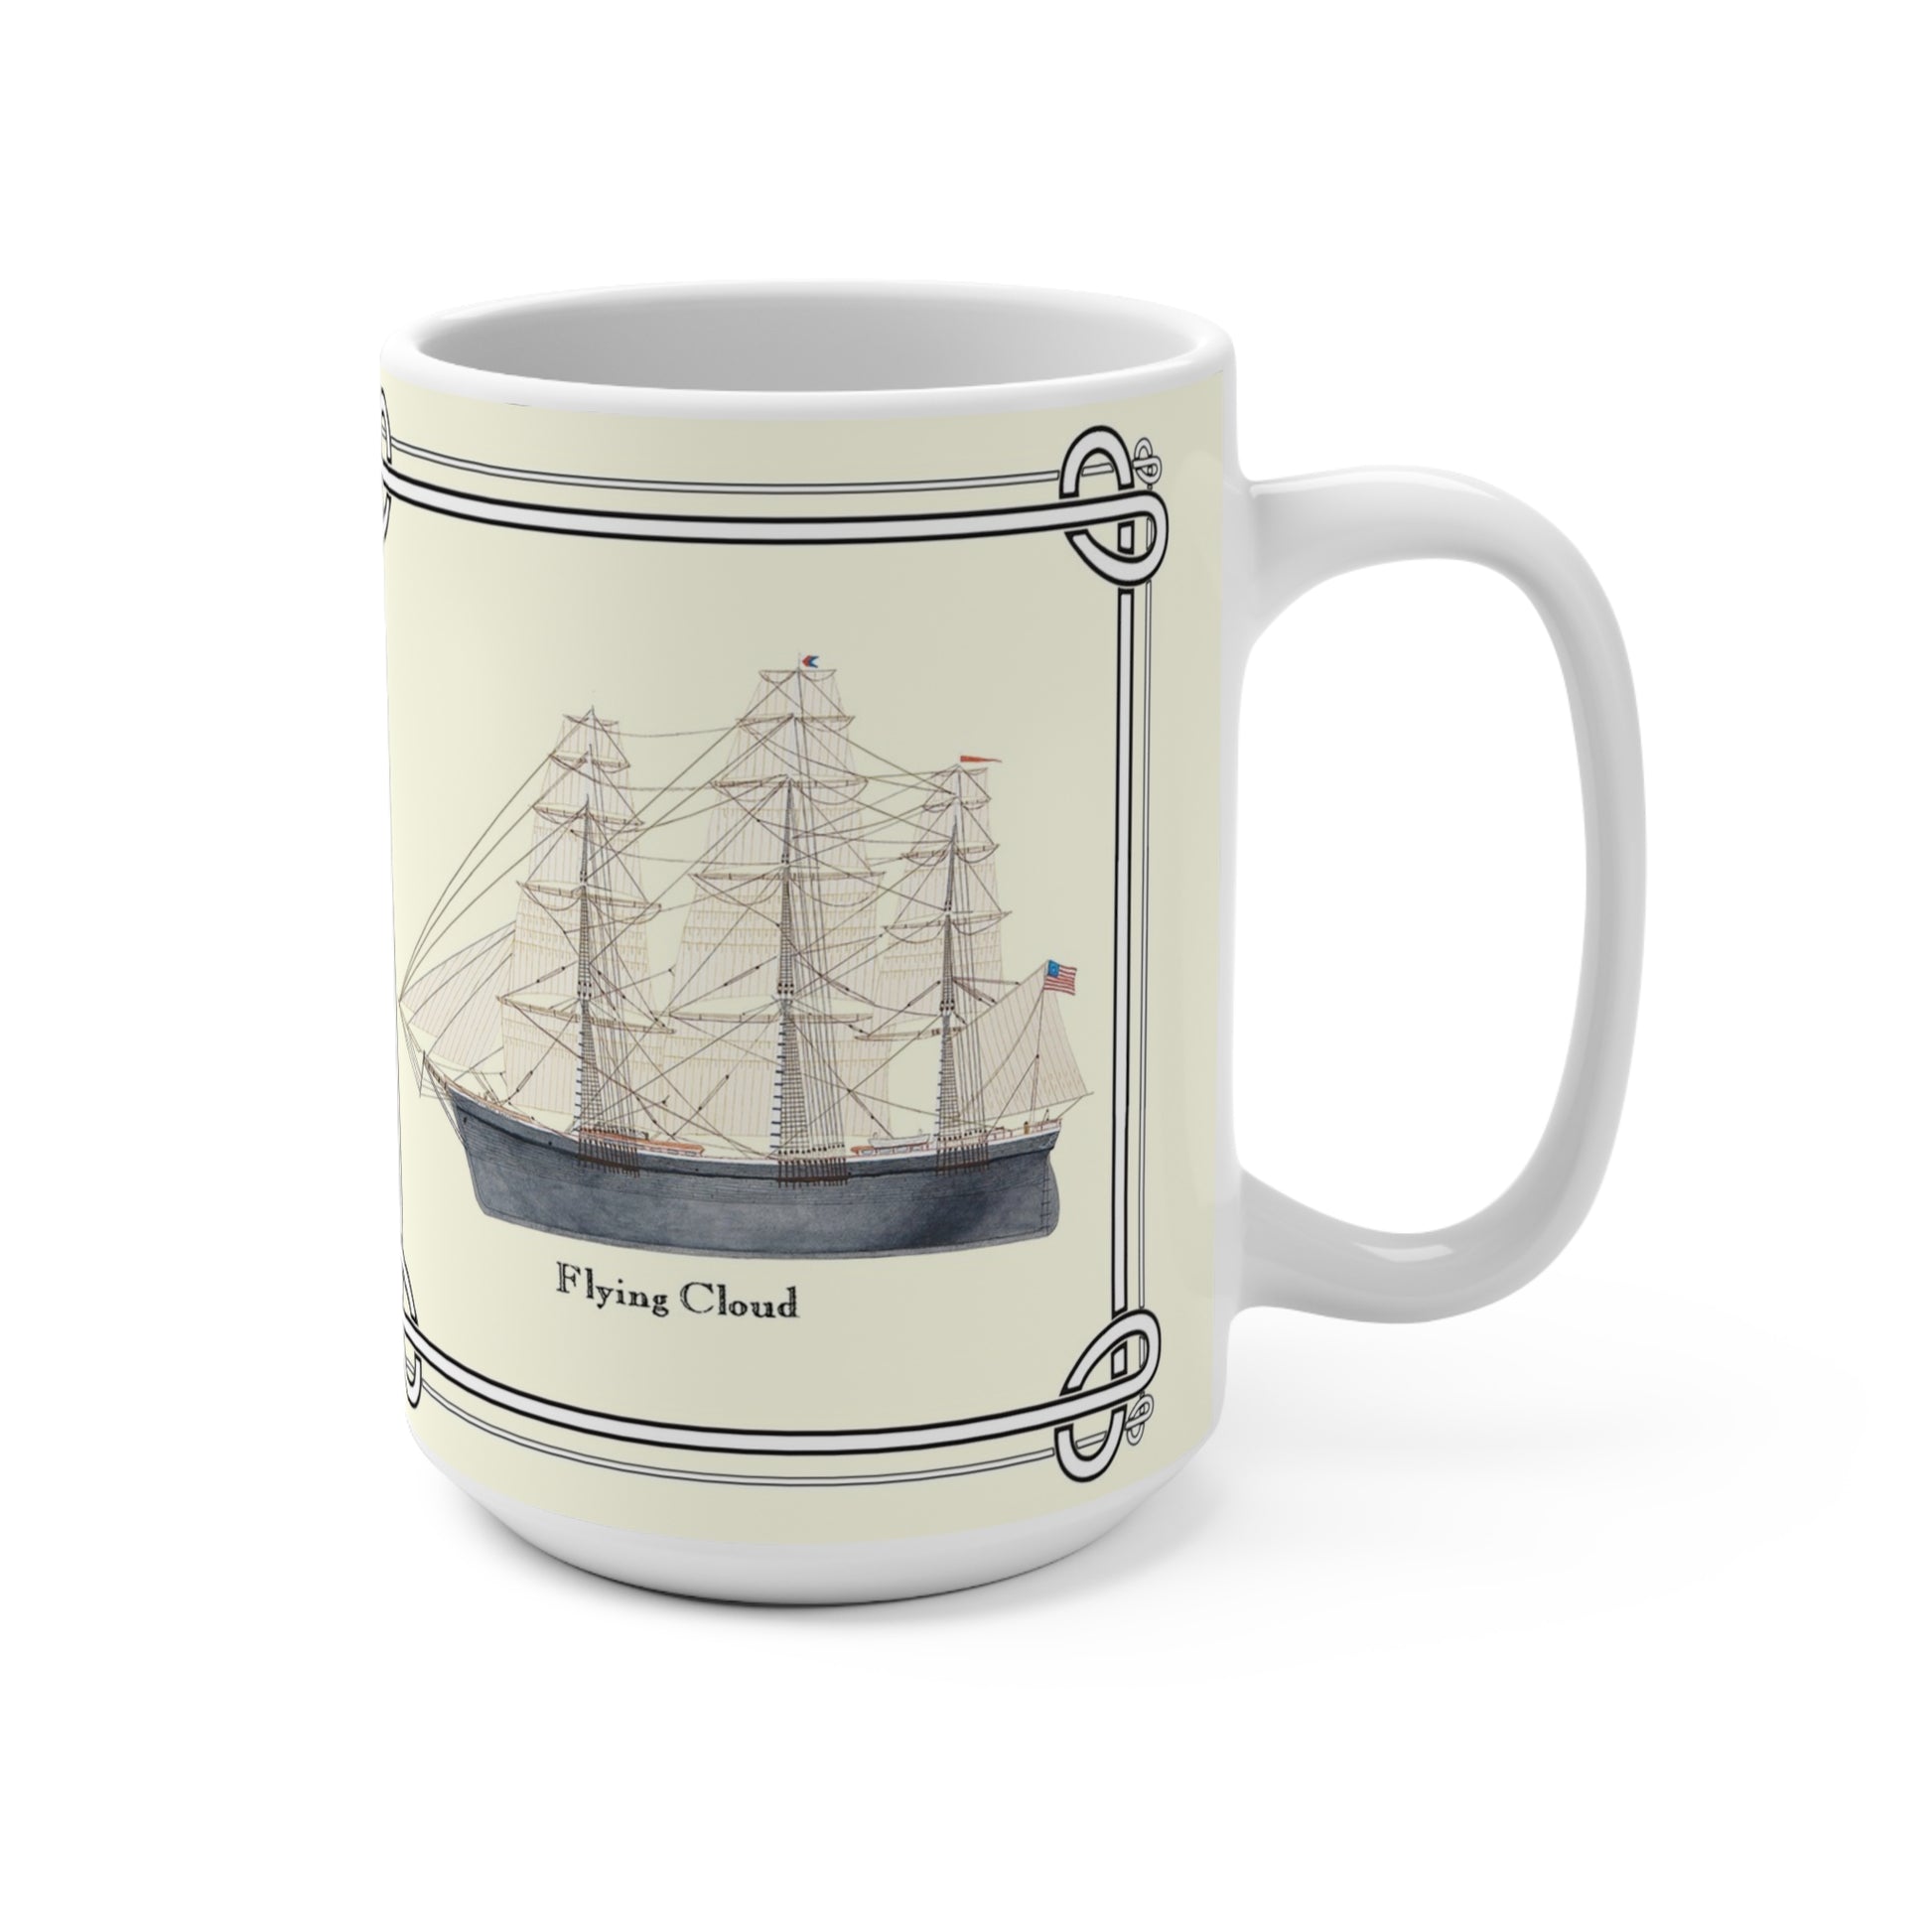 If you, a family member or friend enjoy naval history, it's time to enjoy your favorite beverage in the Flying Cloud mug, Shop today!